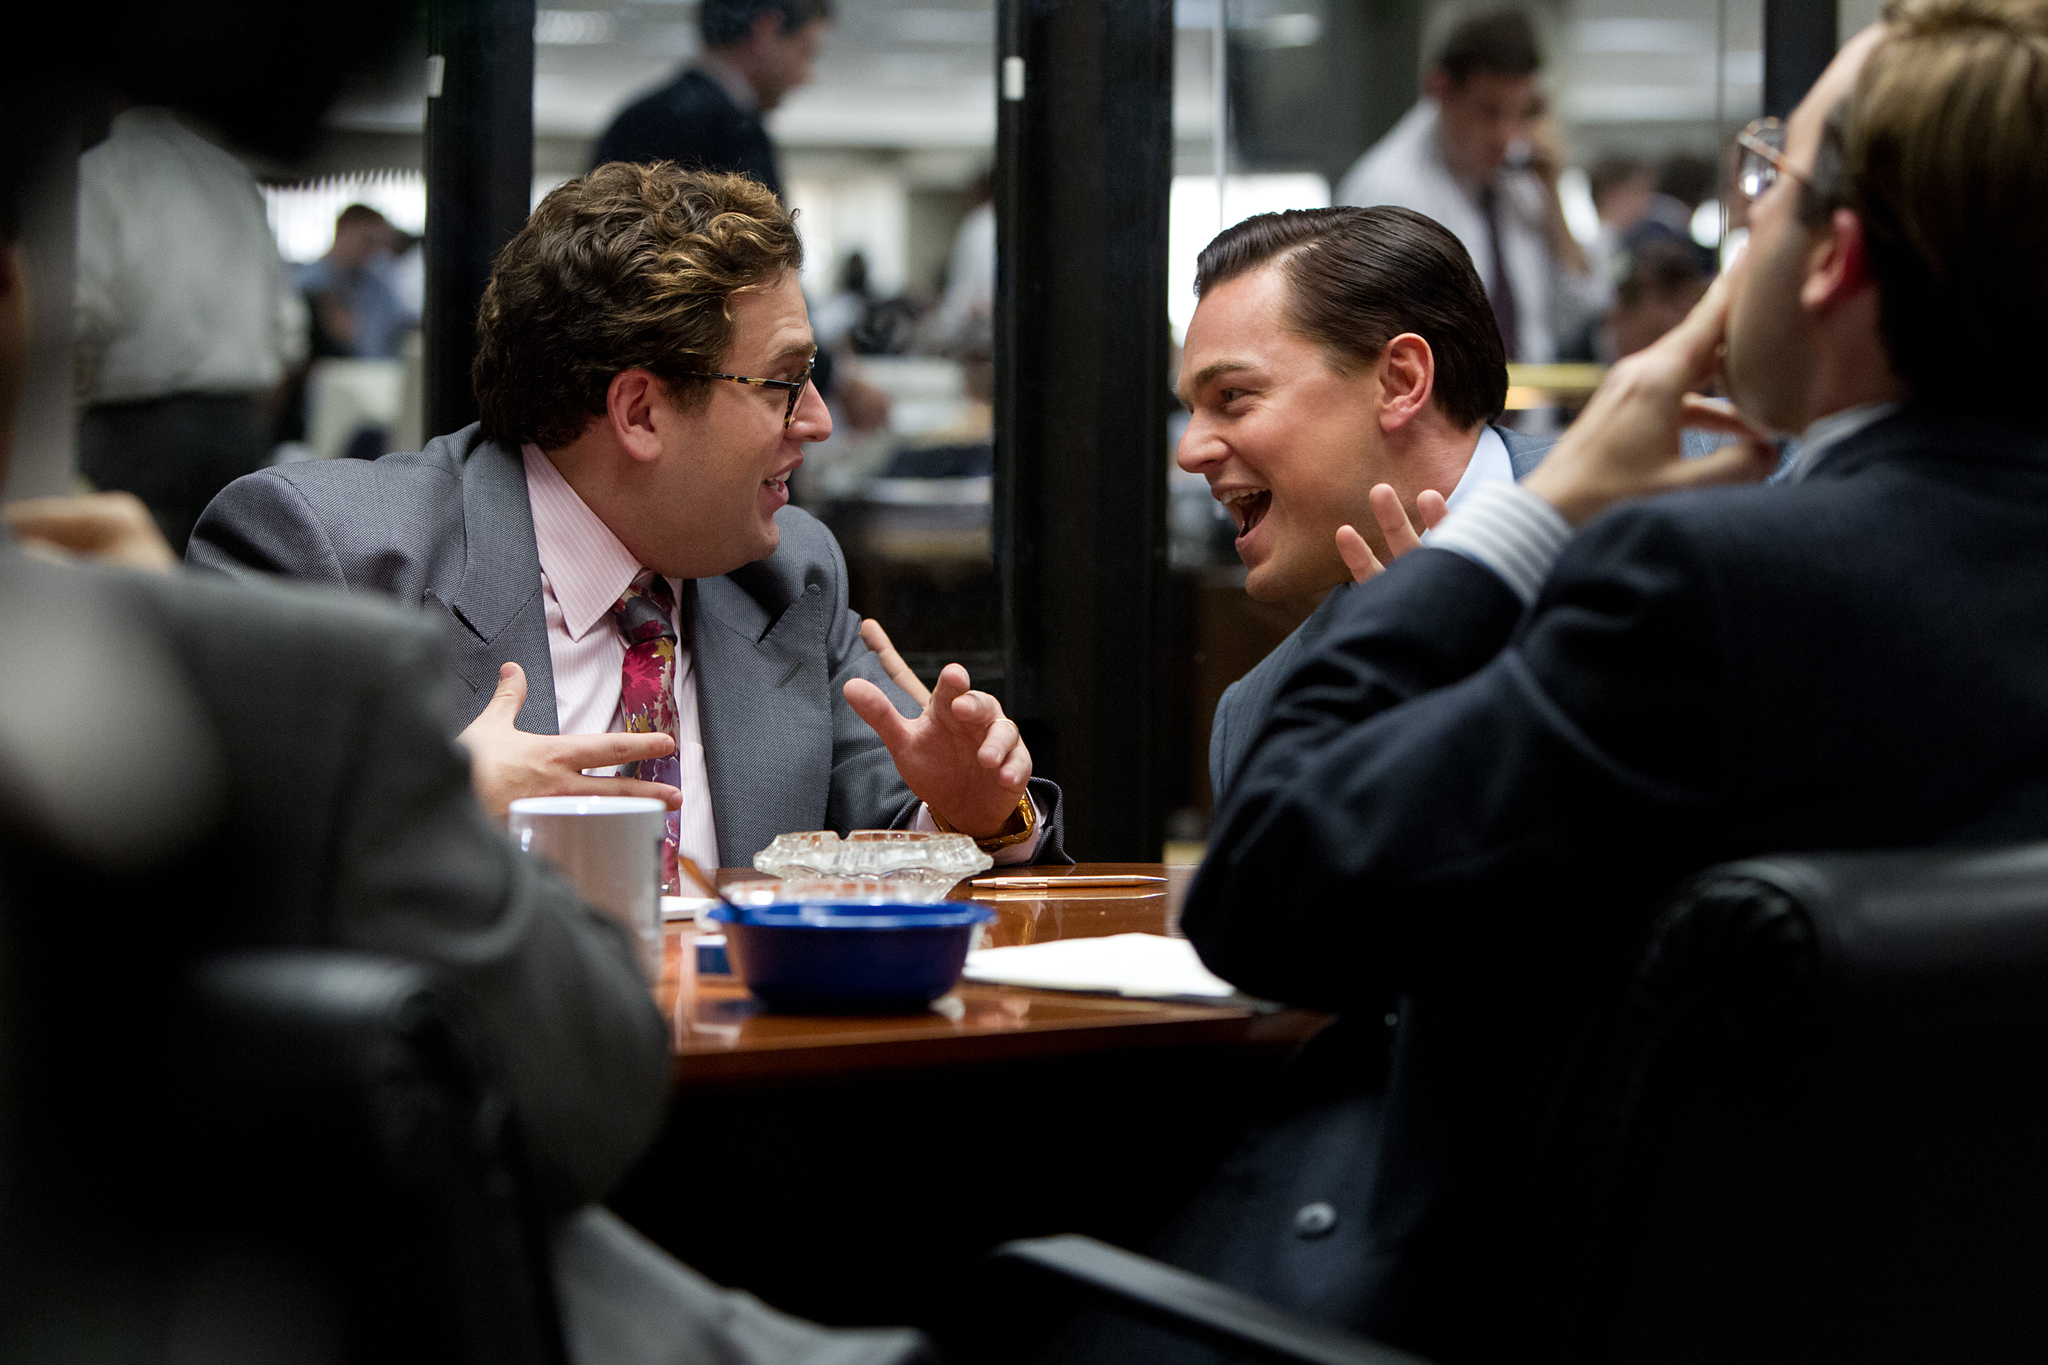 Leonardo DiCaprio and Jonah Hill in The Wolf of Wall Street (2013)